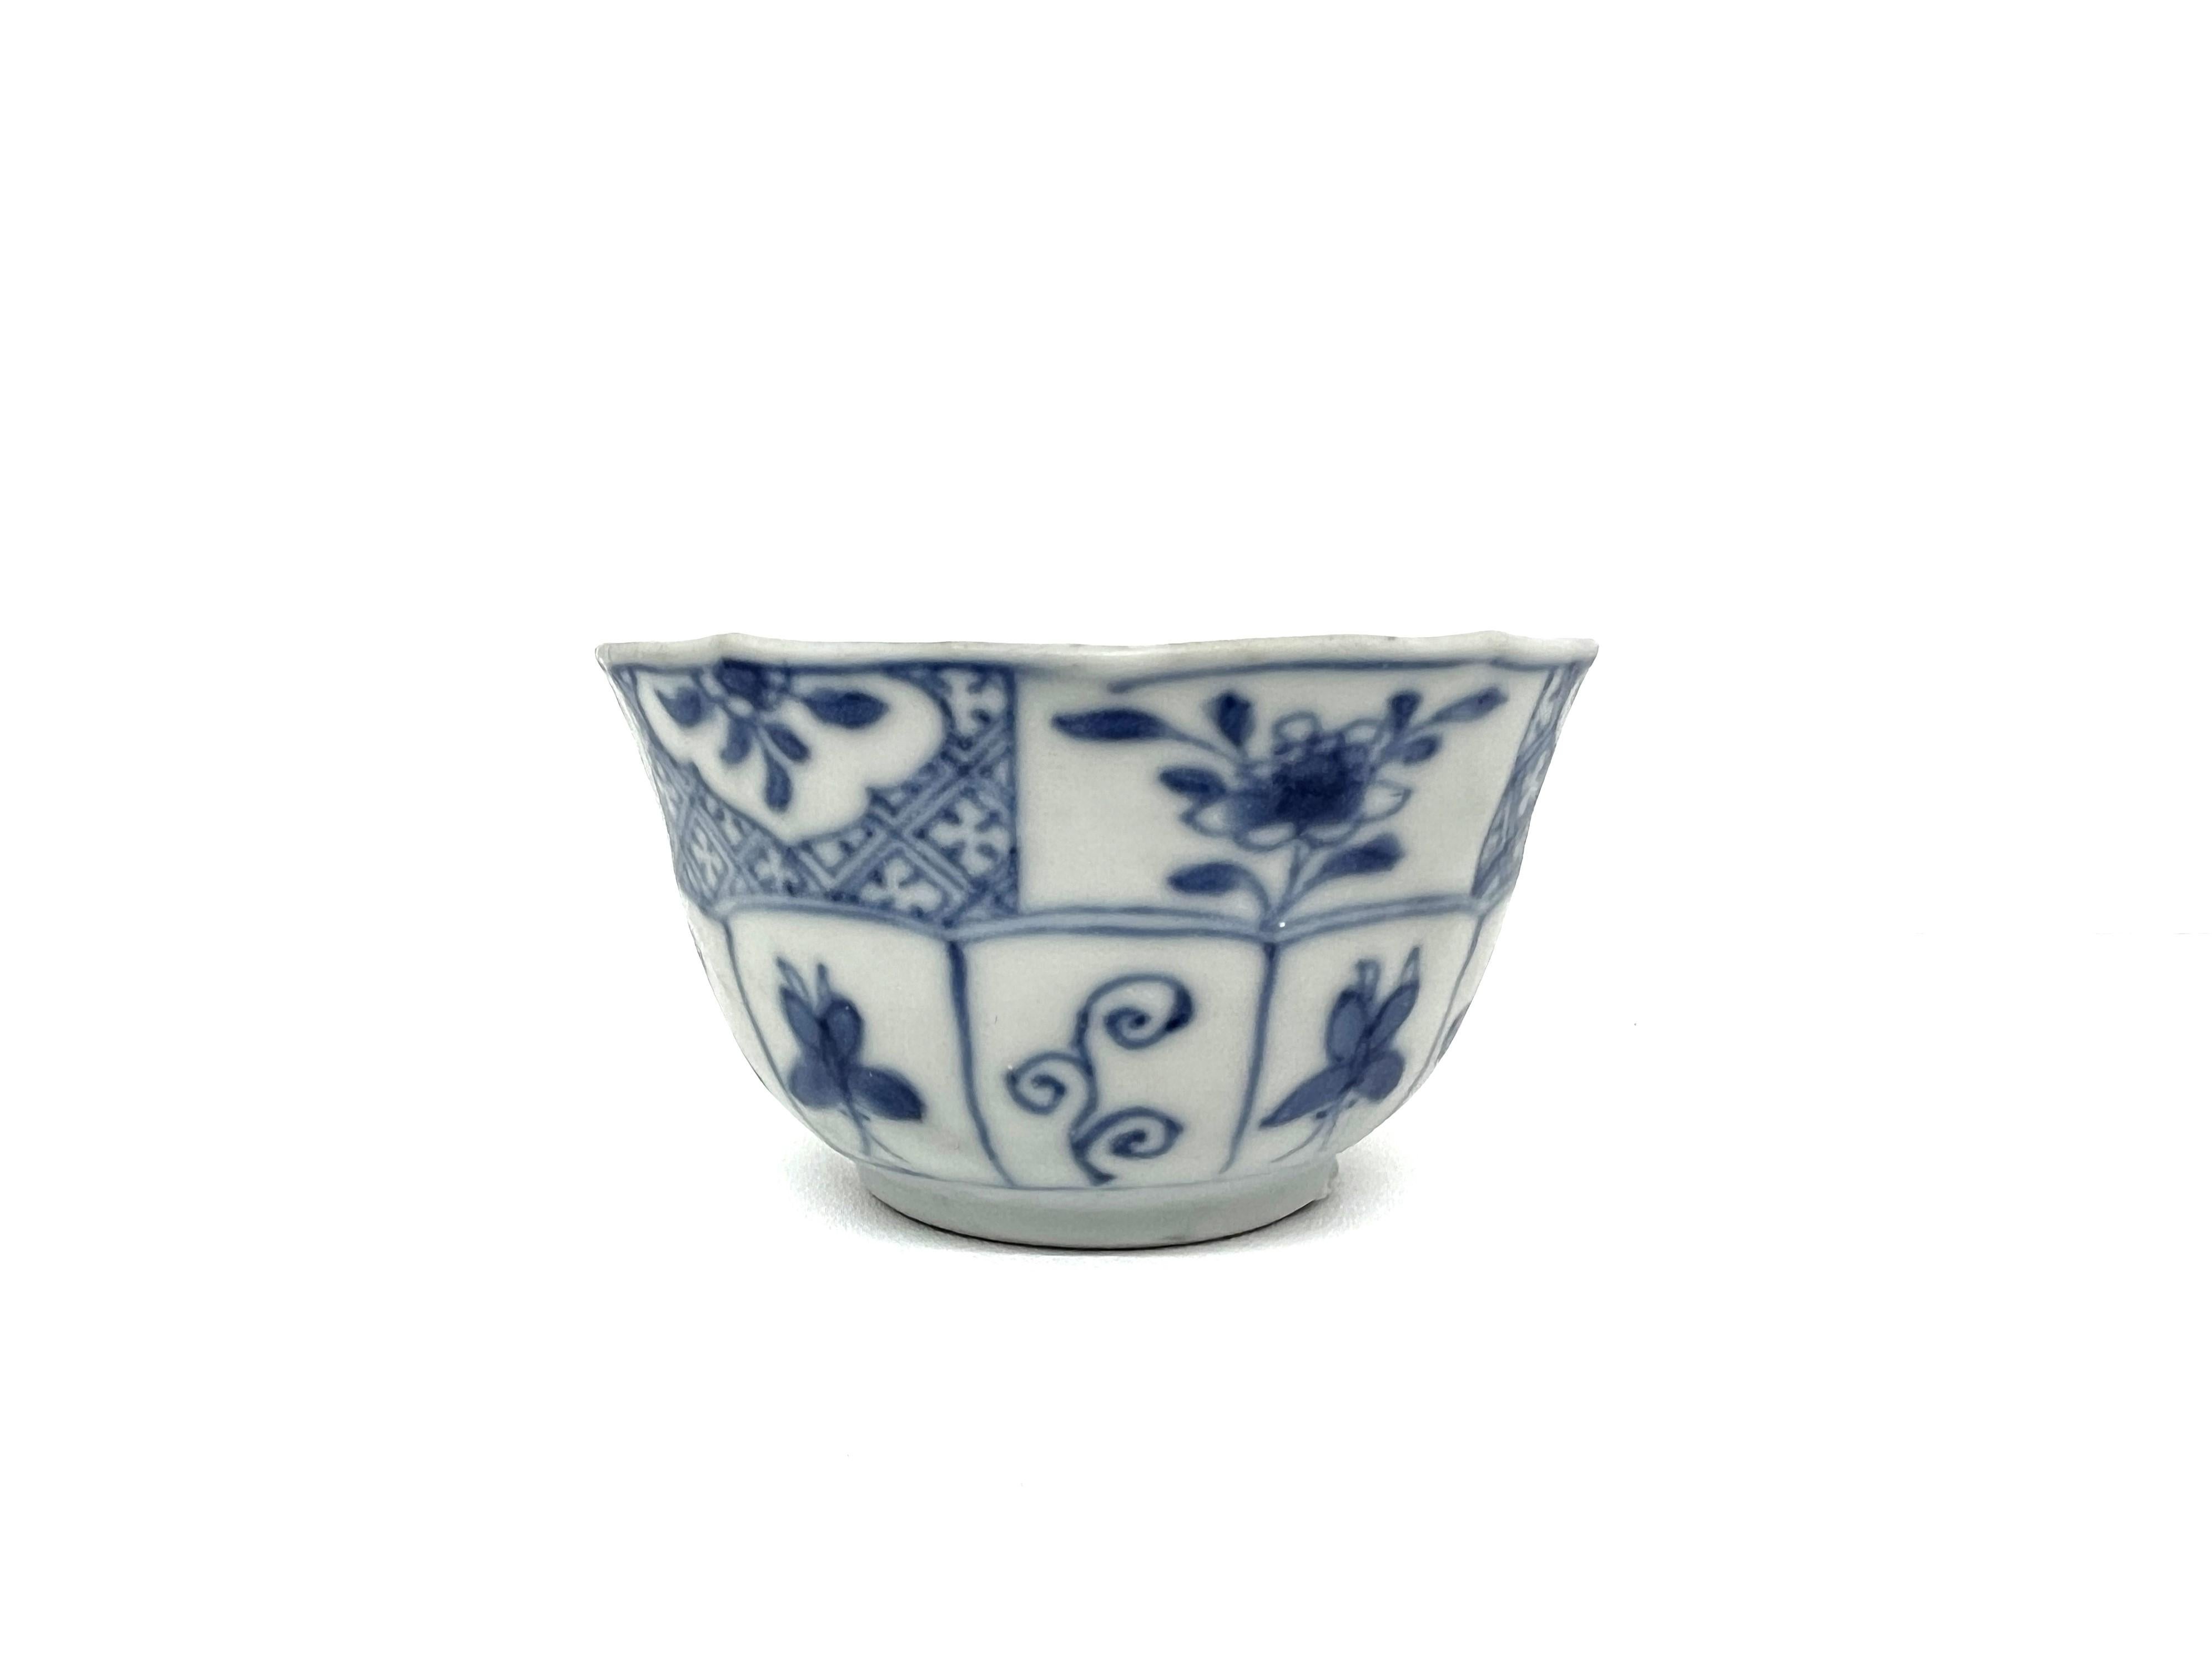 The teabowl depicts botanical elements and butterflies, motifs rich in symbolism within Chinese culture. Butterflies often represent transformation and immortality, while the various flowers and plants indicate the changing seasons and nature's